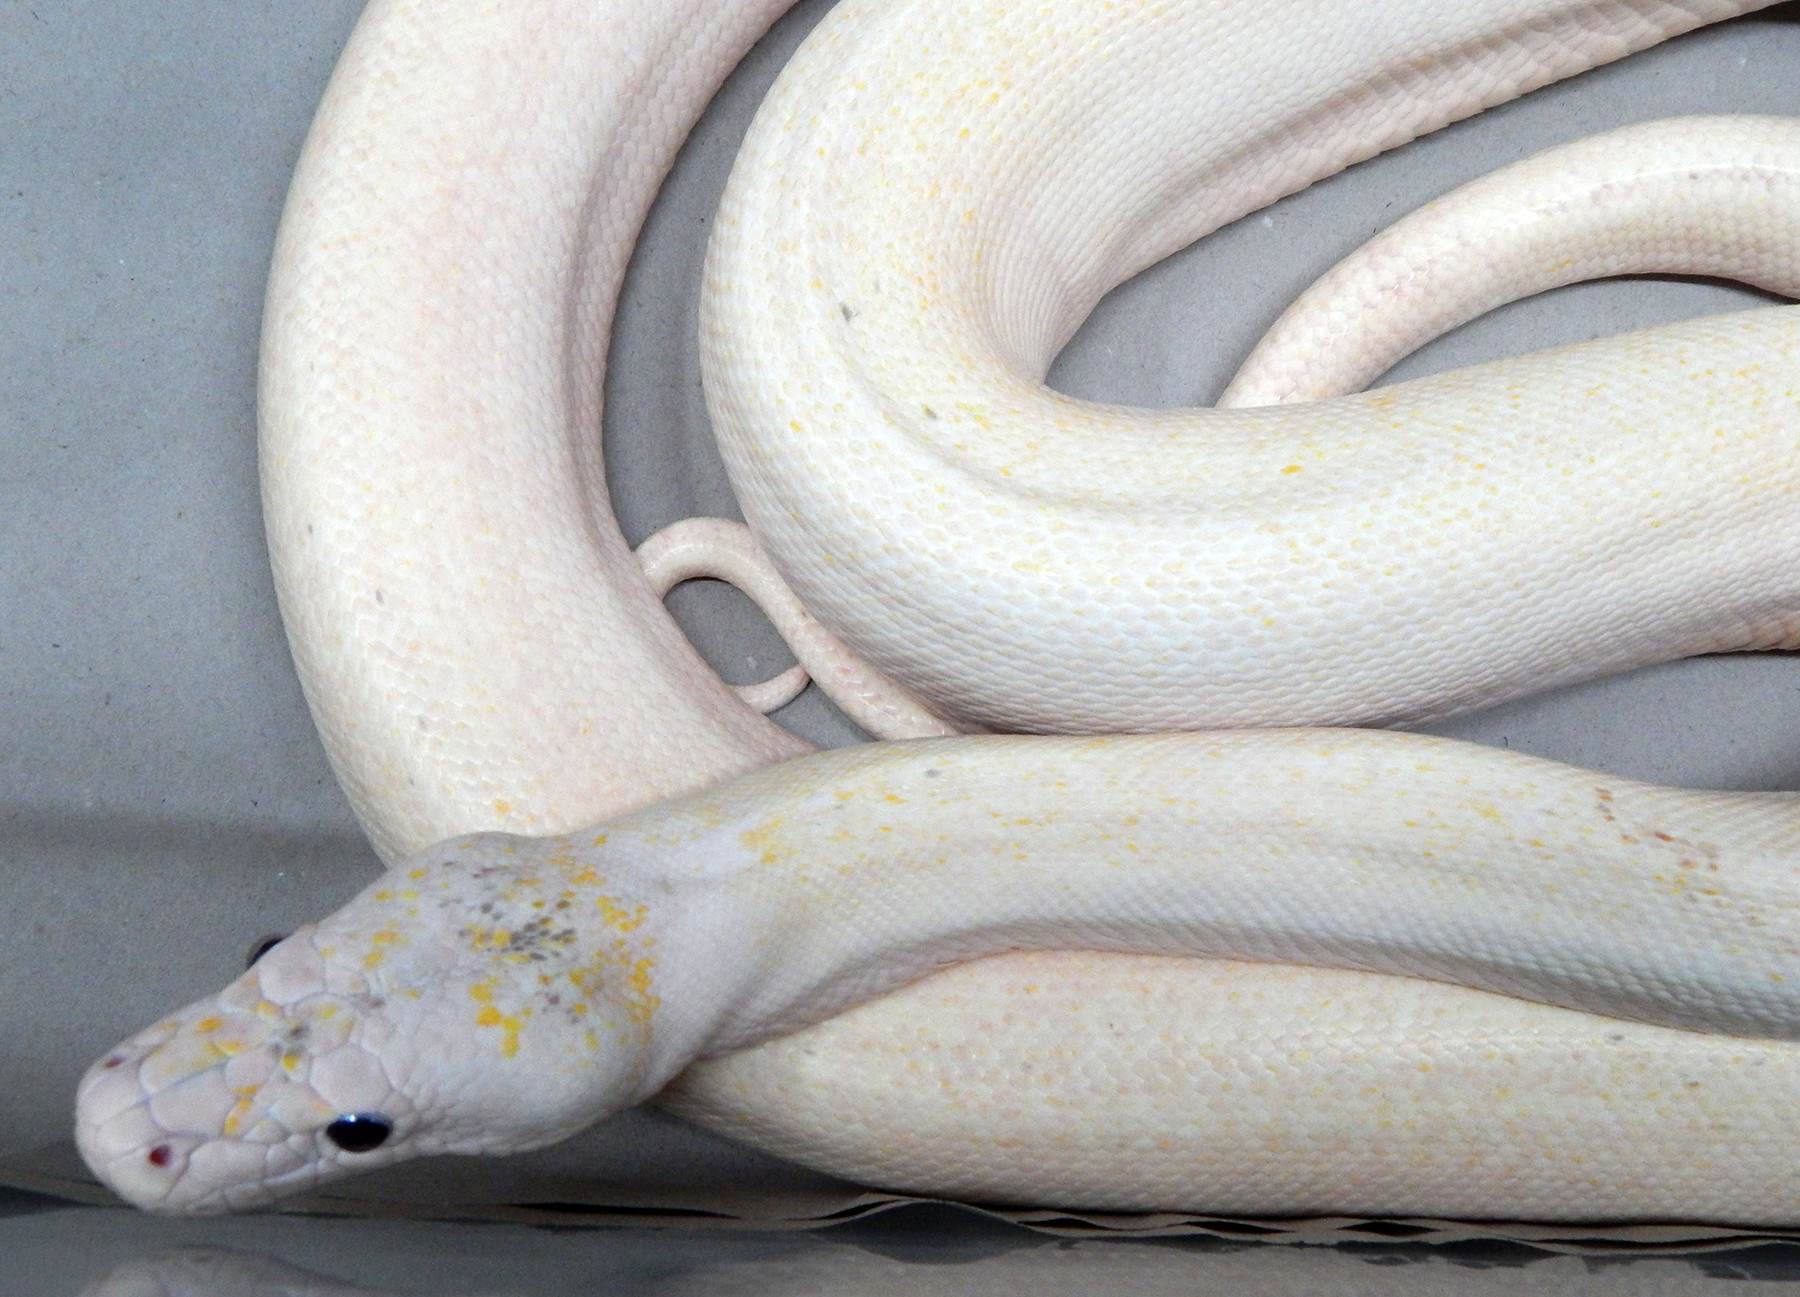 Ivory Reticulated Python by Mystic Reptiles, LLC